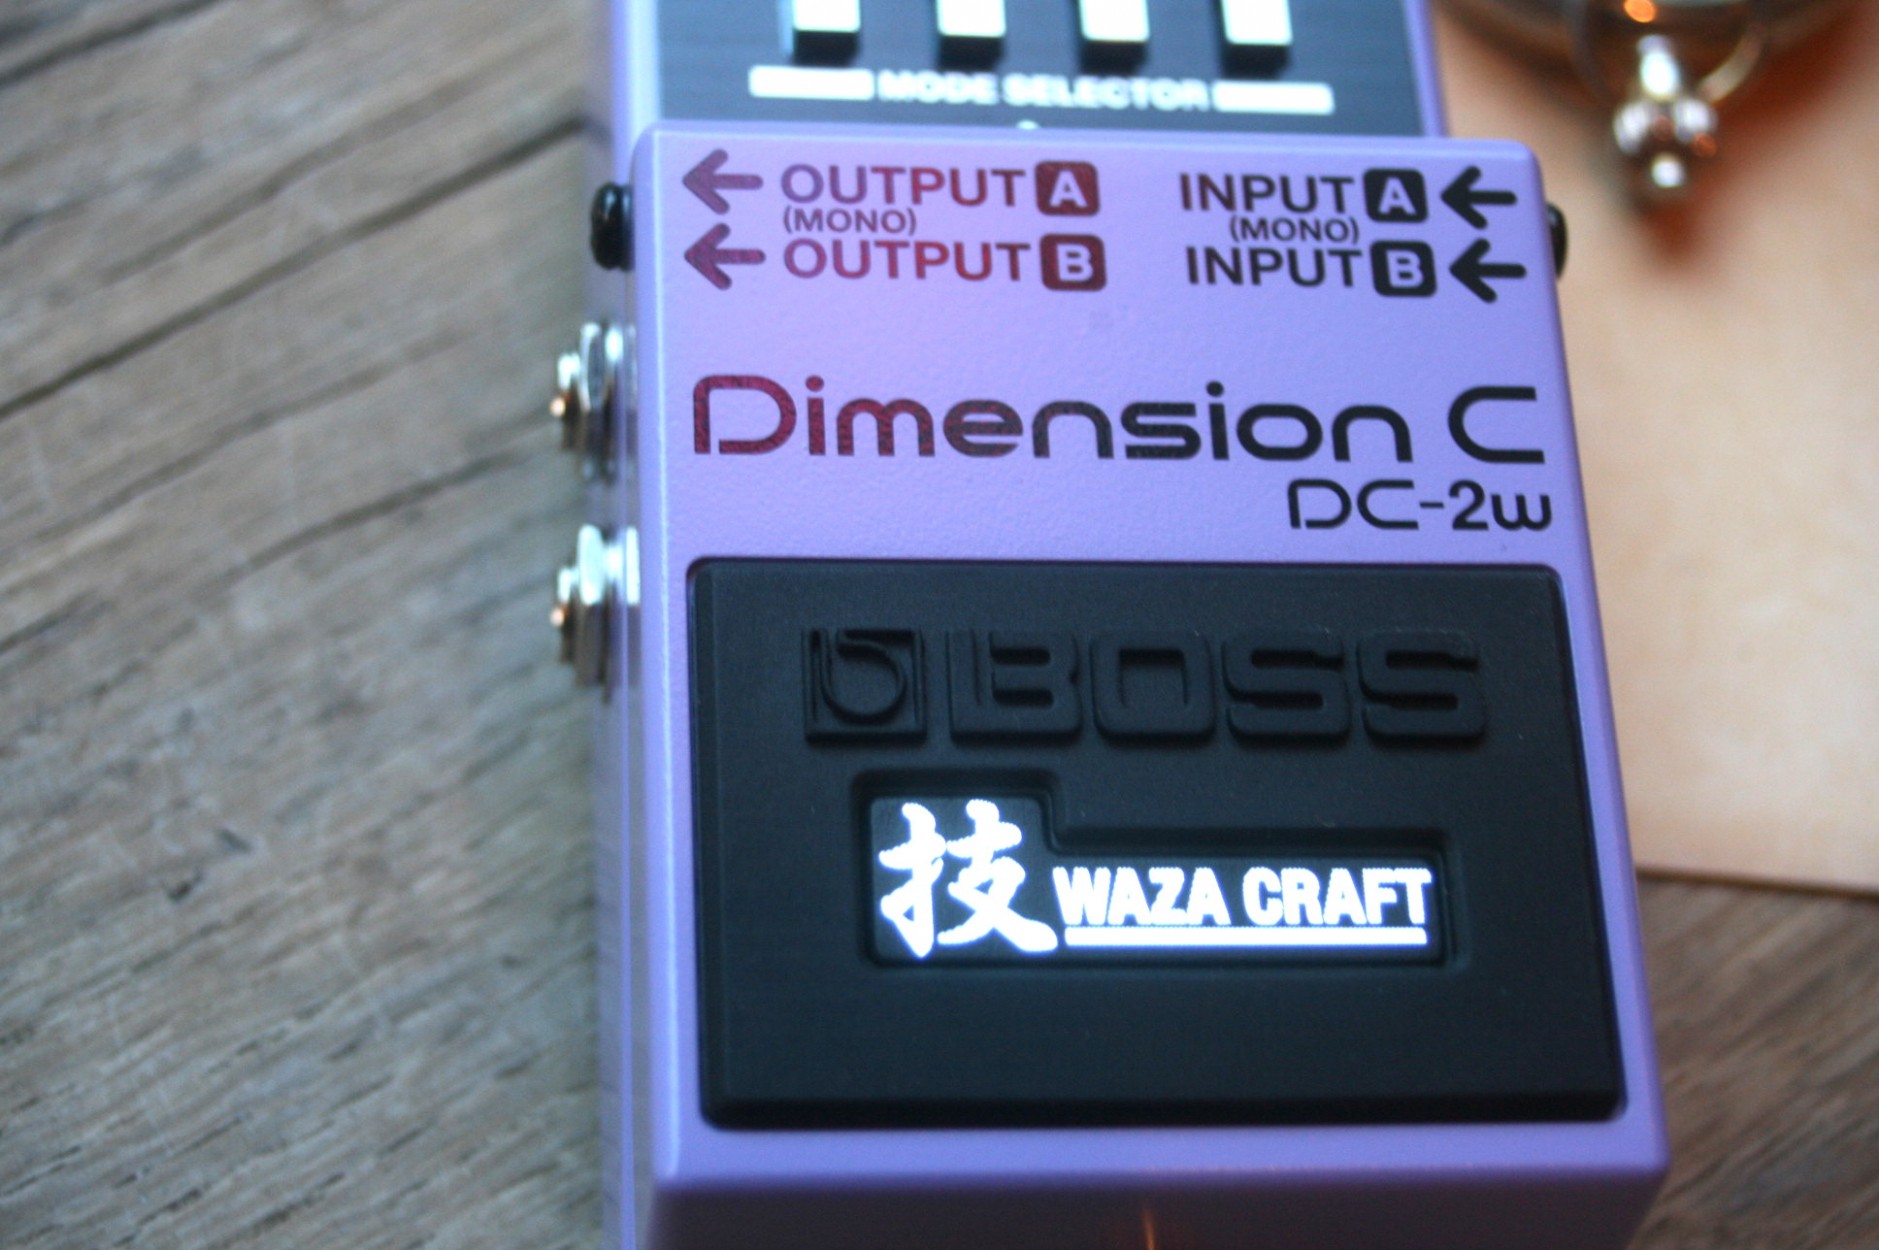 BOSS DC2-W Dimention C Made In Japan 技 - 楽器/器材